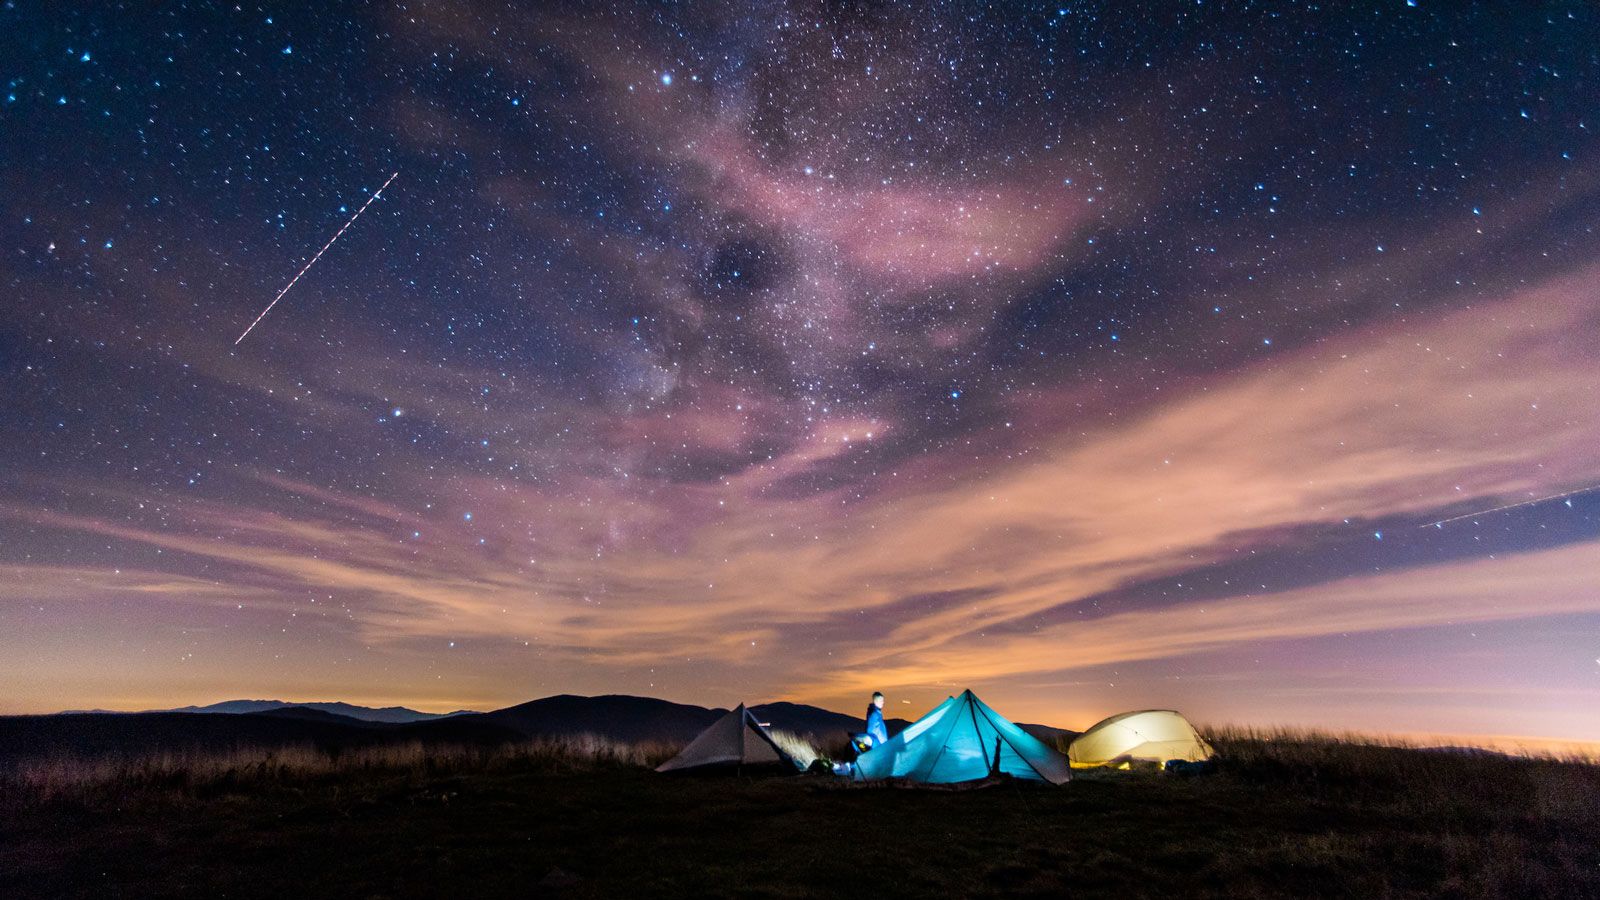 Night skies above the Appalachian Trail in the Roan Highlands. Photo by Horizonline Pictures